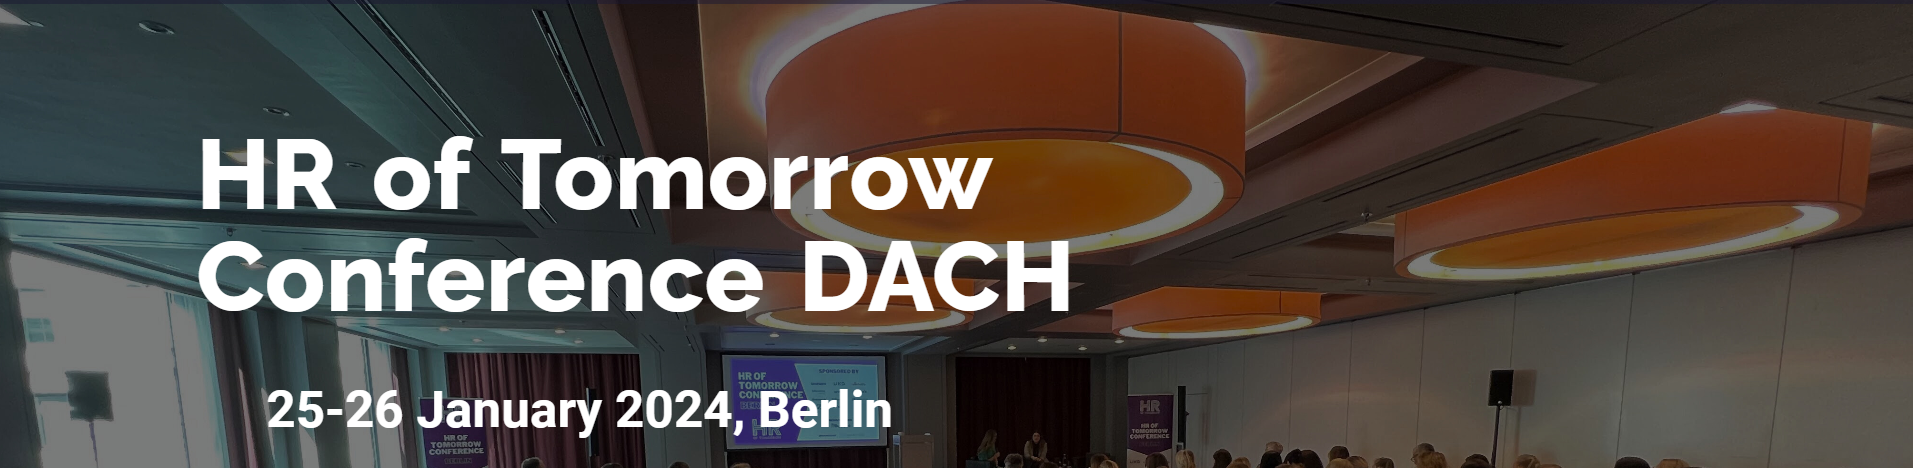 HR of Tomorrow Conference DACH